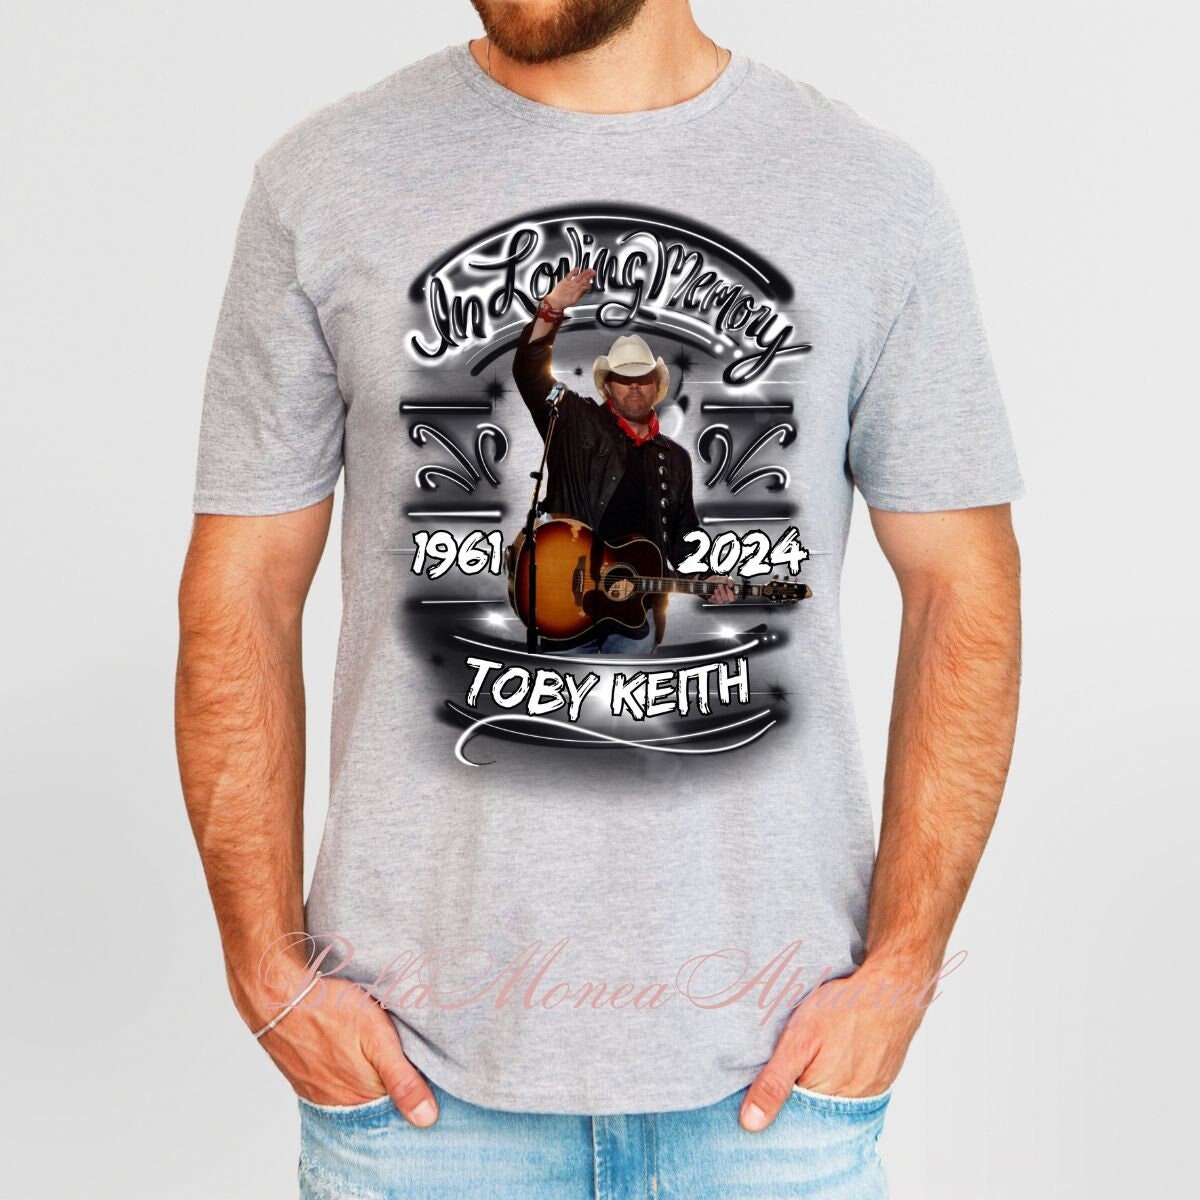 Toby Keith, Toby Keith Shirt, RIP Toby Tee, Toby Keith T-Shirt, Toby T-shirt